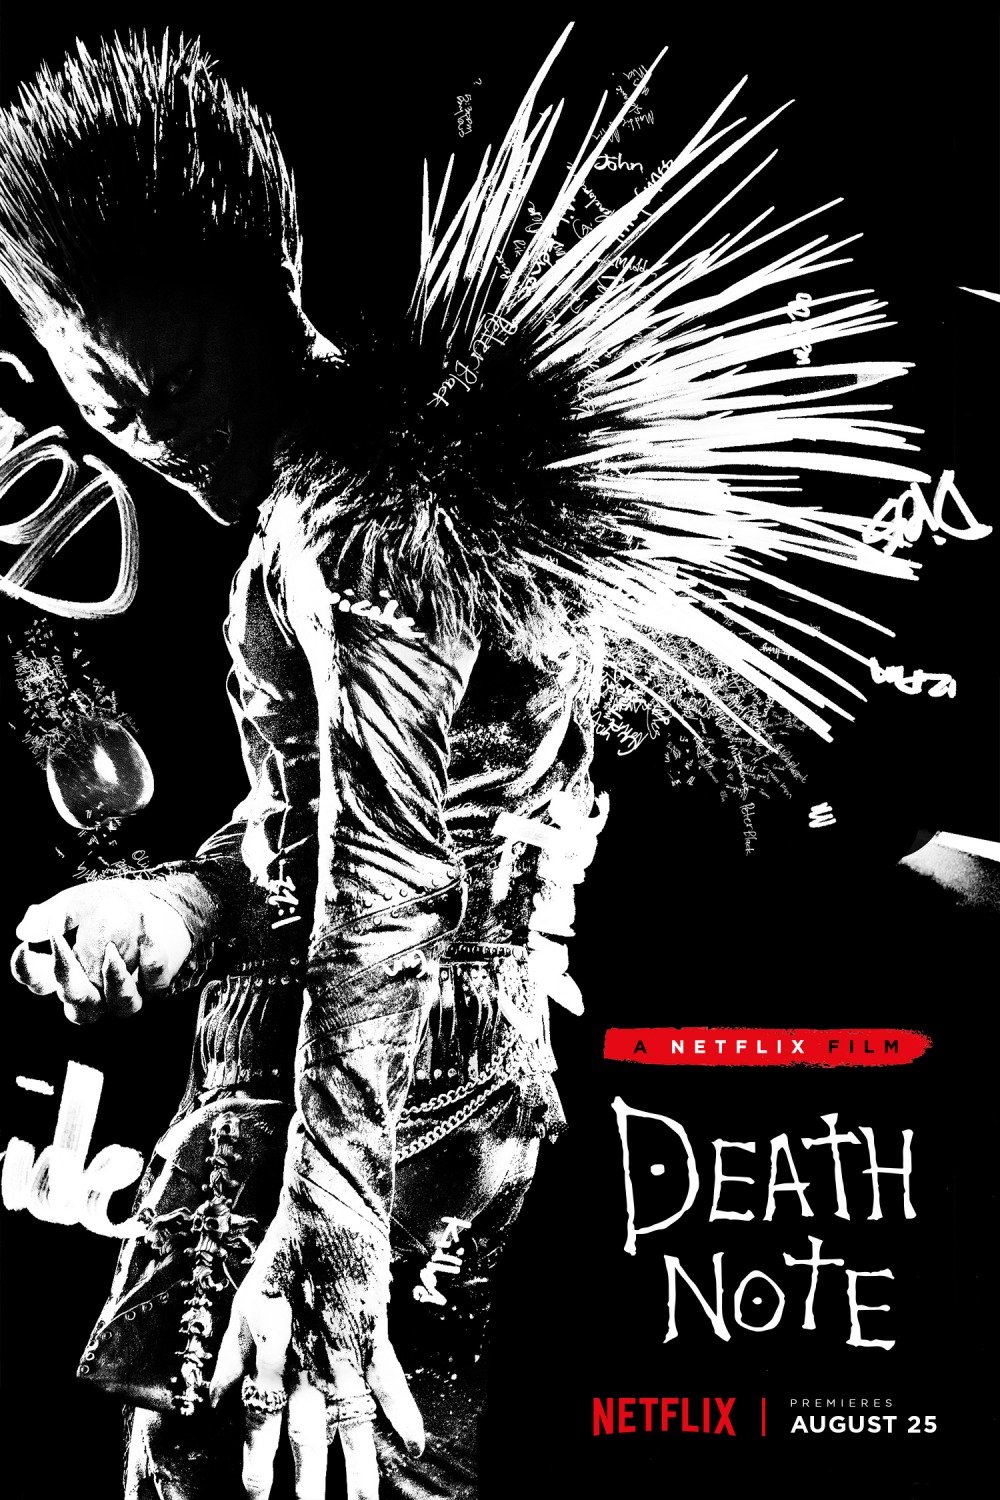 Poster of the movie Death Note